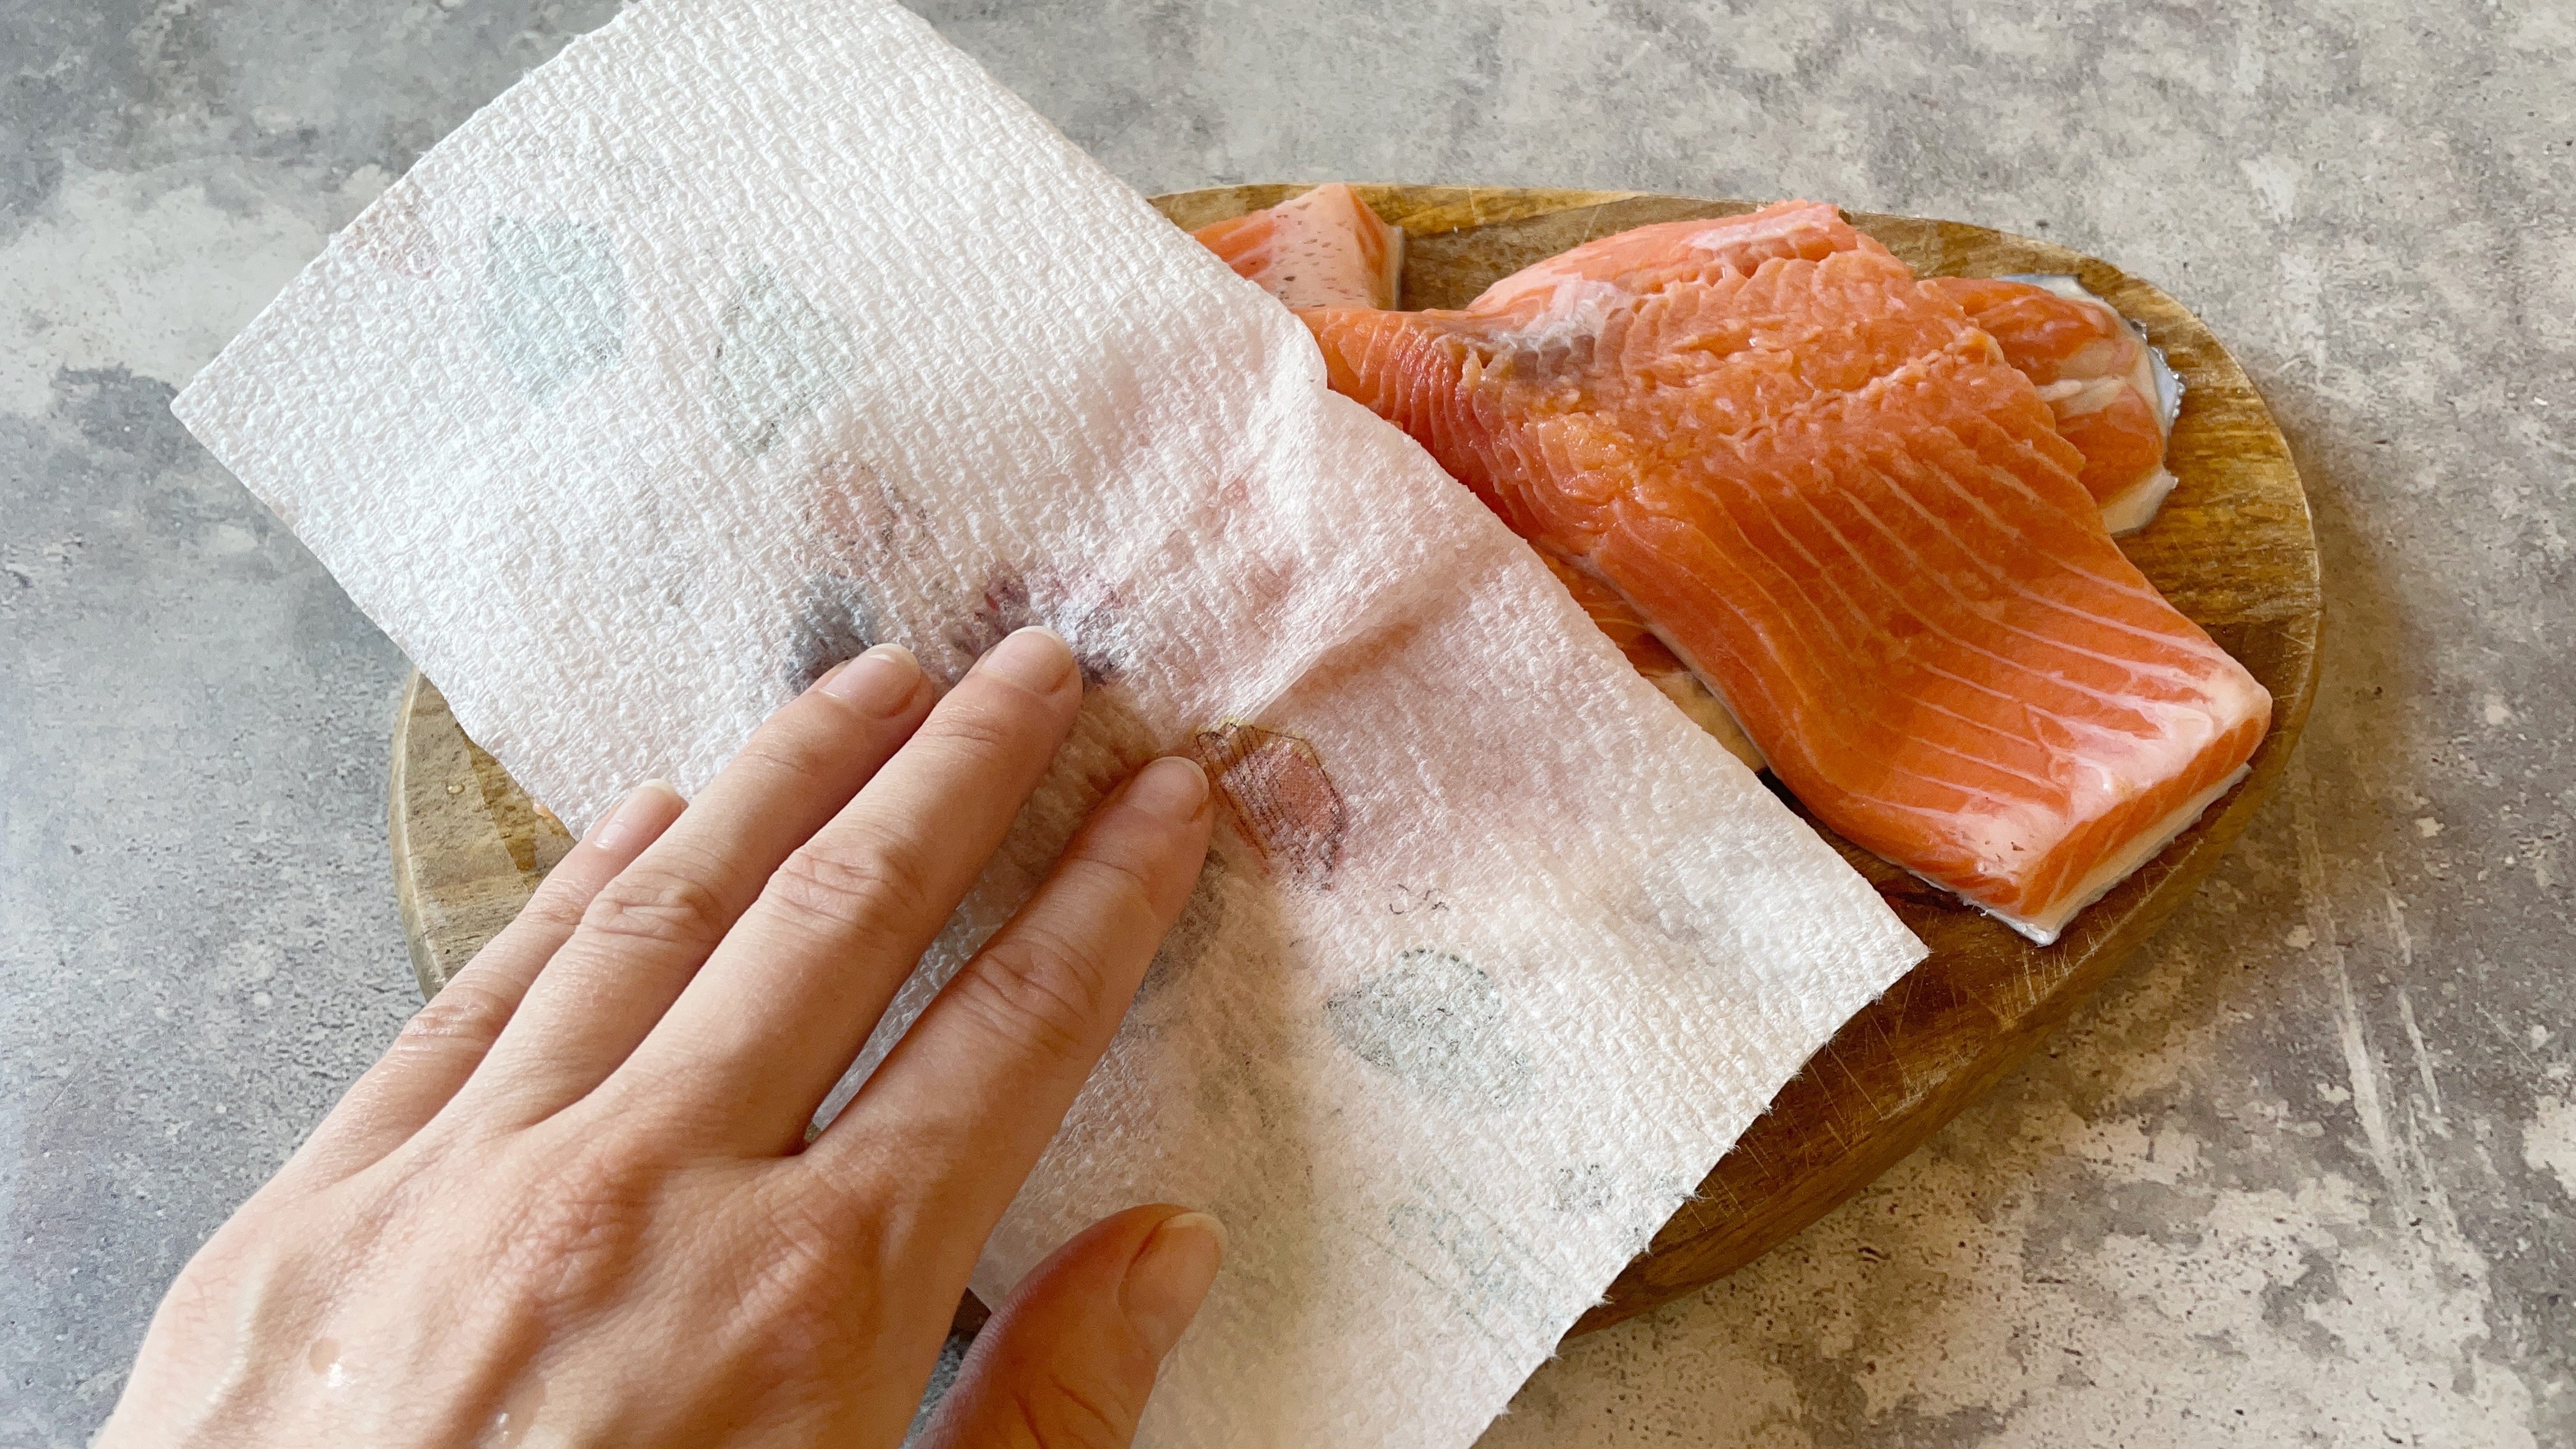 1658188682 682 Baked salmon trout fillets the recipe to prepare them tasty - August 20, 2022